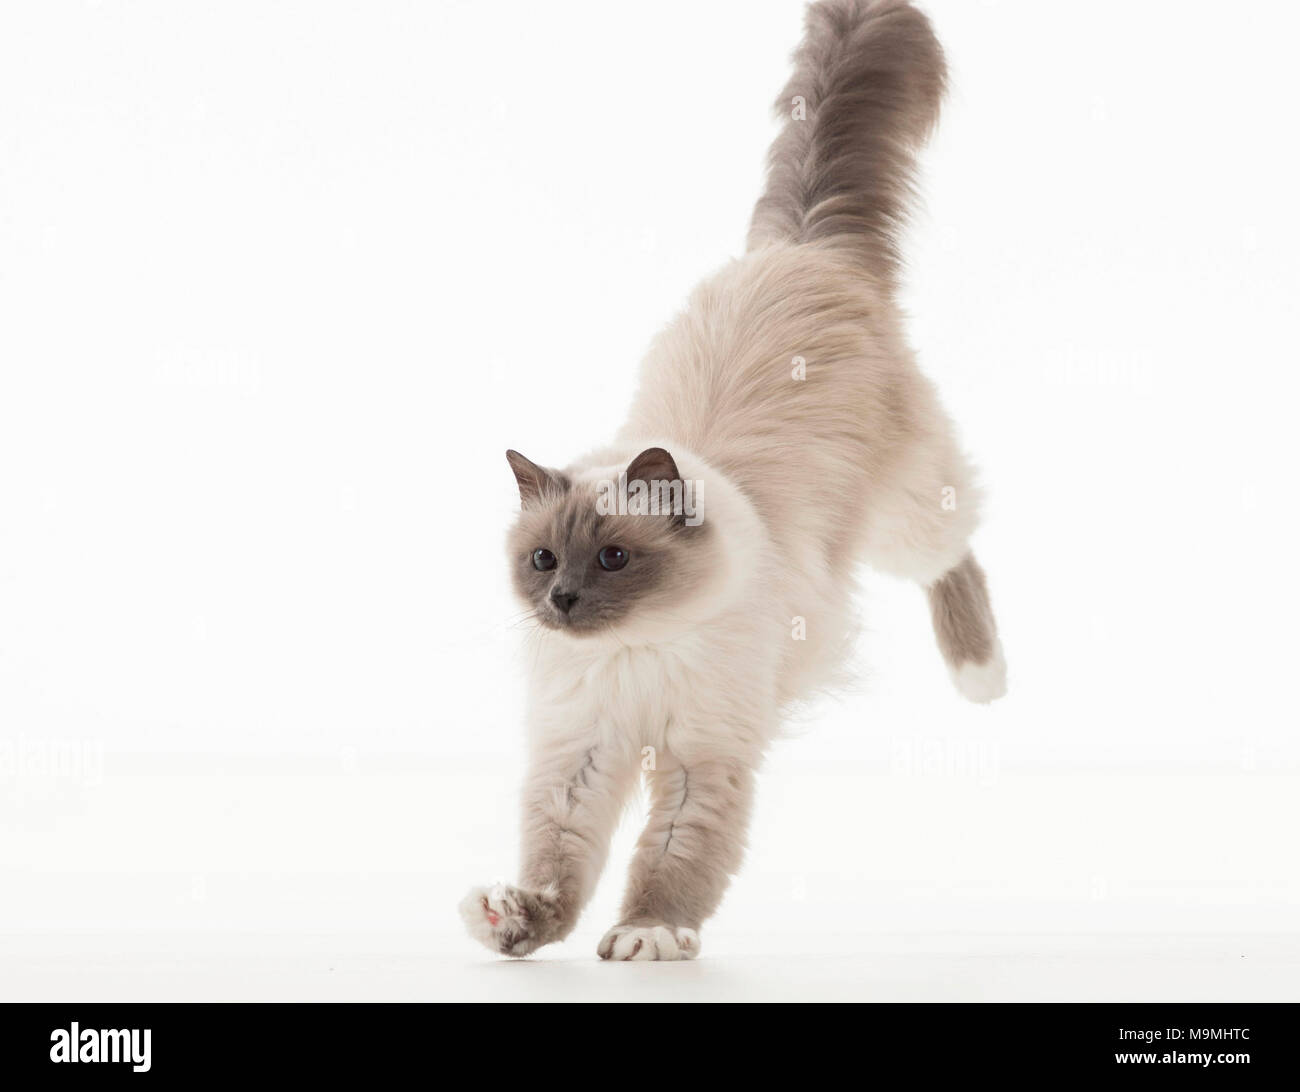 Sacred cat of Burma. Adult jumping. Studio picture against a white background. Germany Stock Photo